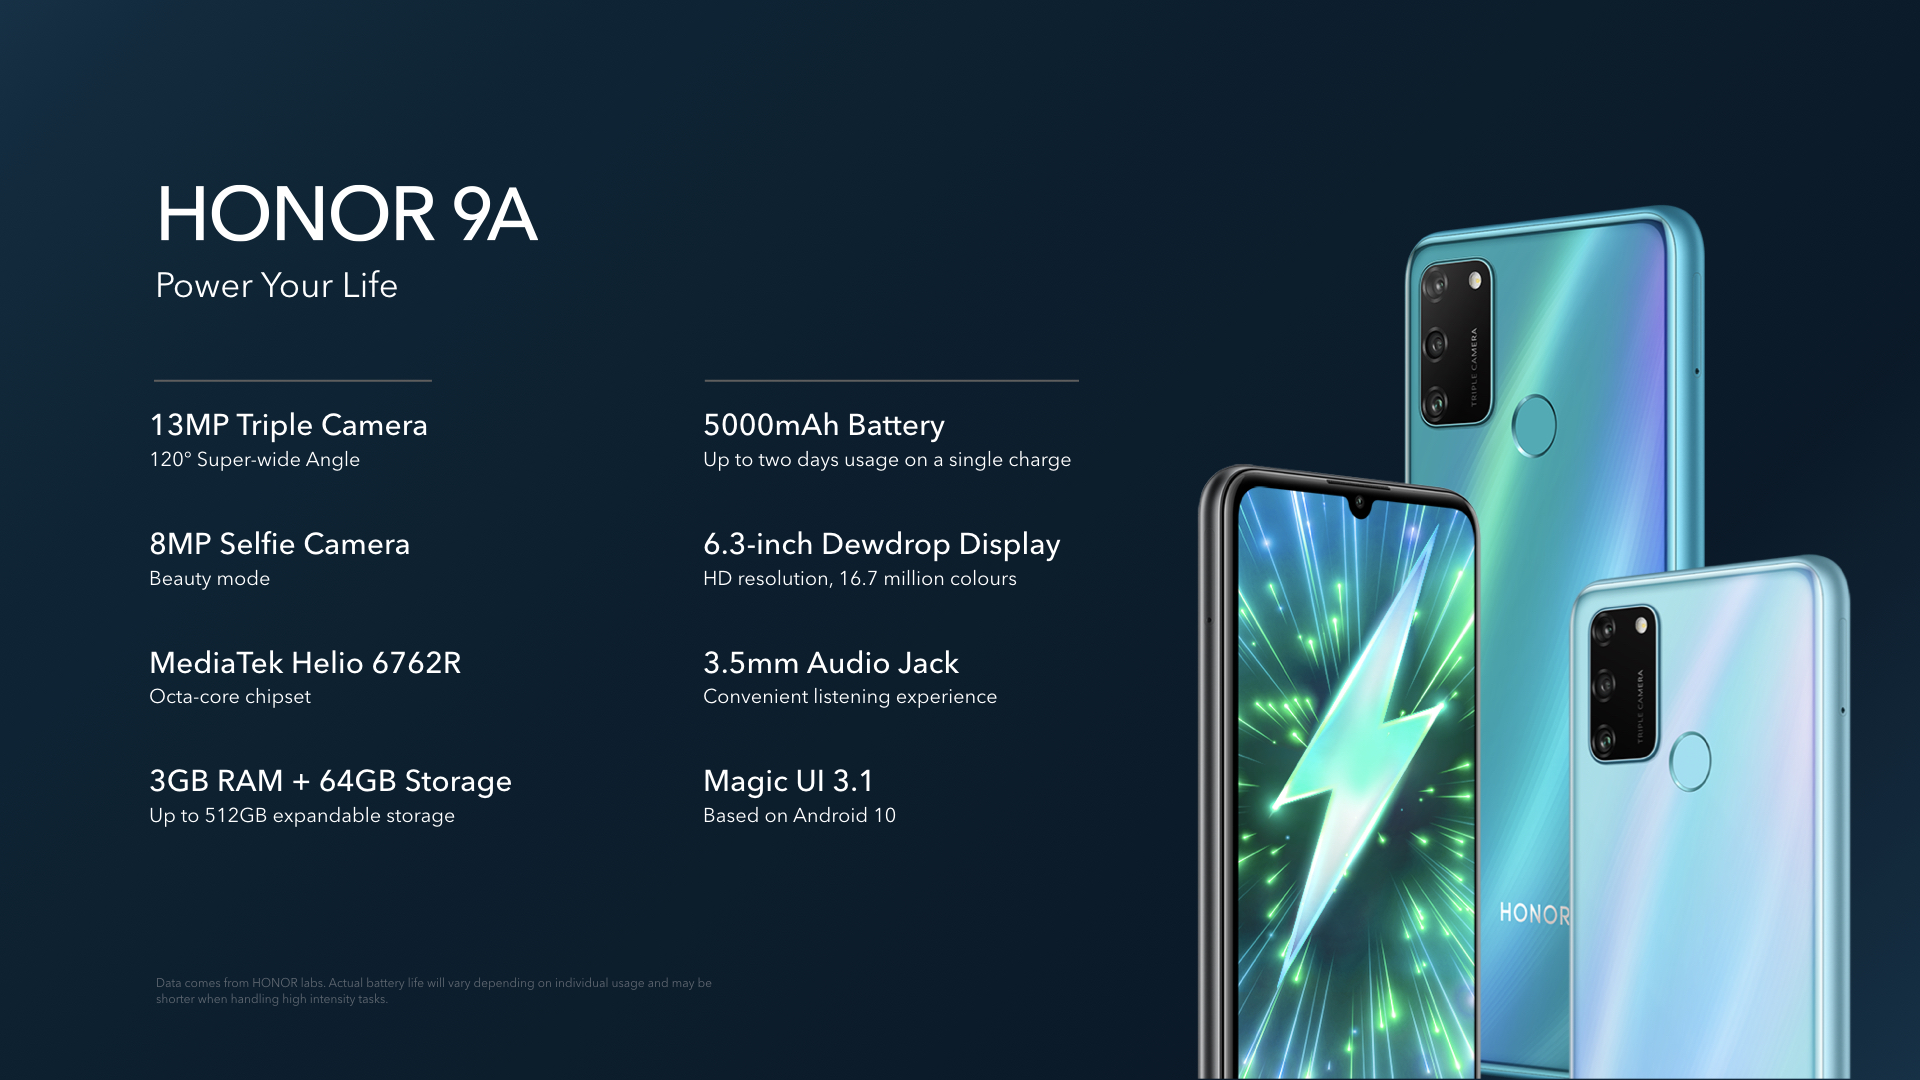 Daarbij Integraal knal HONOR on Twitter: "With 5000mAh Big Battery, 64GB big storage and  Ultra-wide Triple camera, the #HONOR9A – is now here! What features excite  you the most? Tell us now! #HONOR9A #PowerYourLife https://t.co/TYVU1iz4oQ"  /